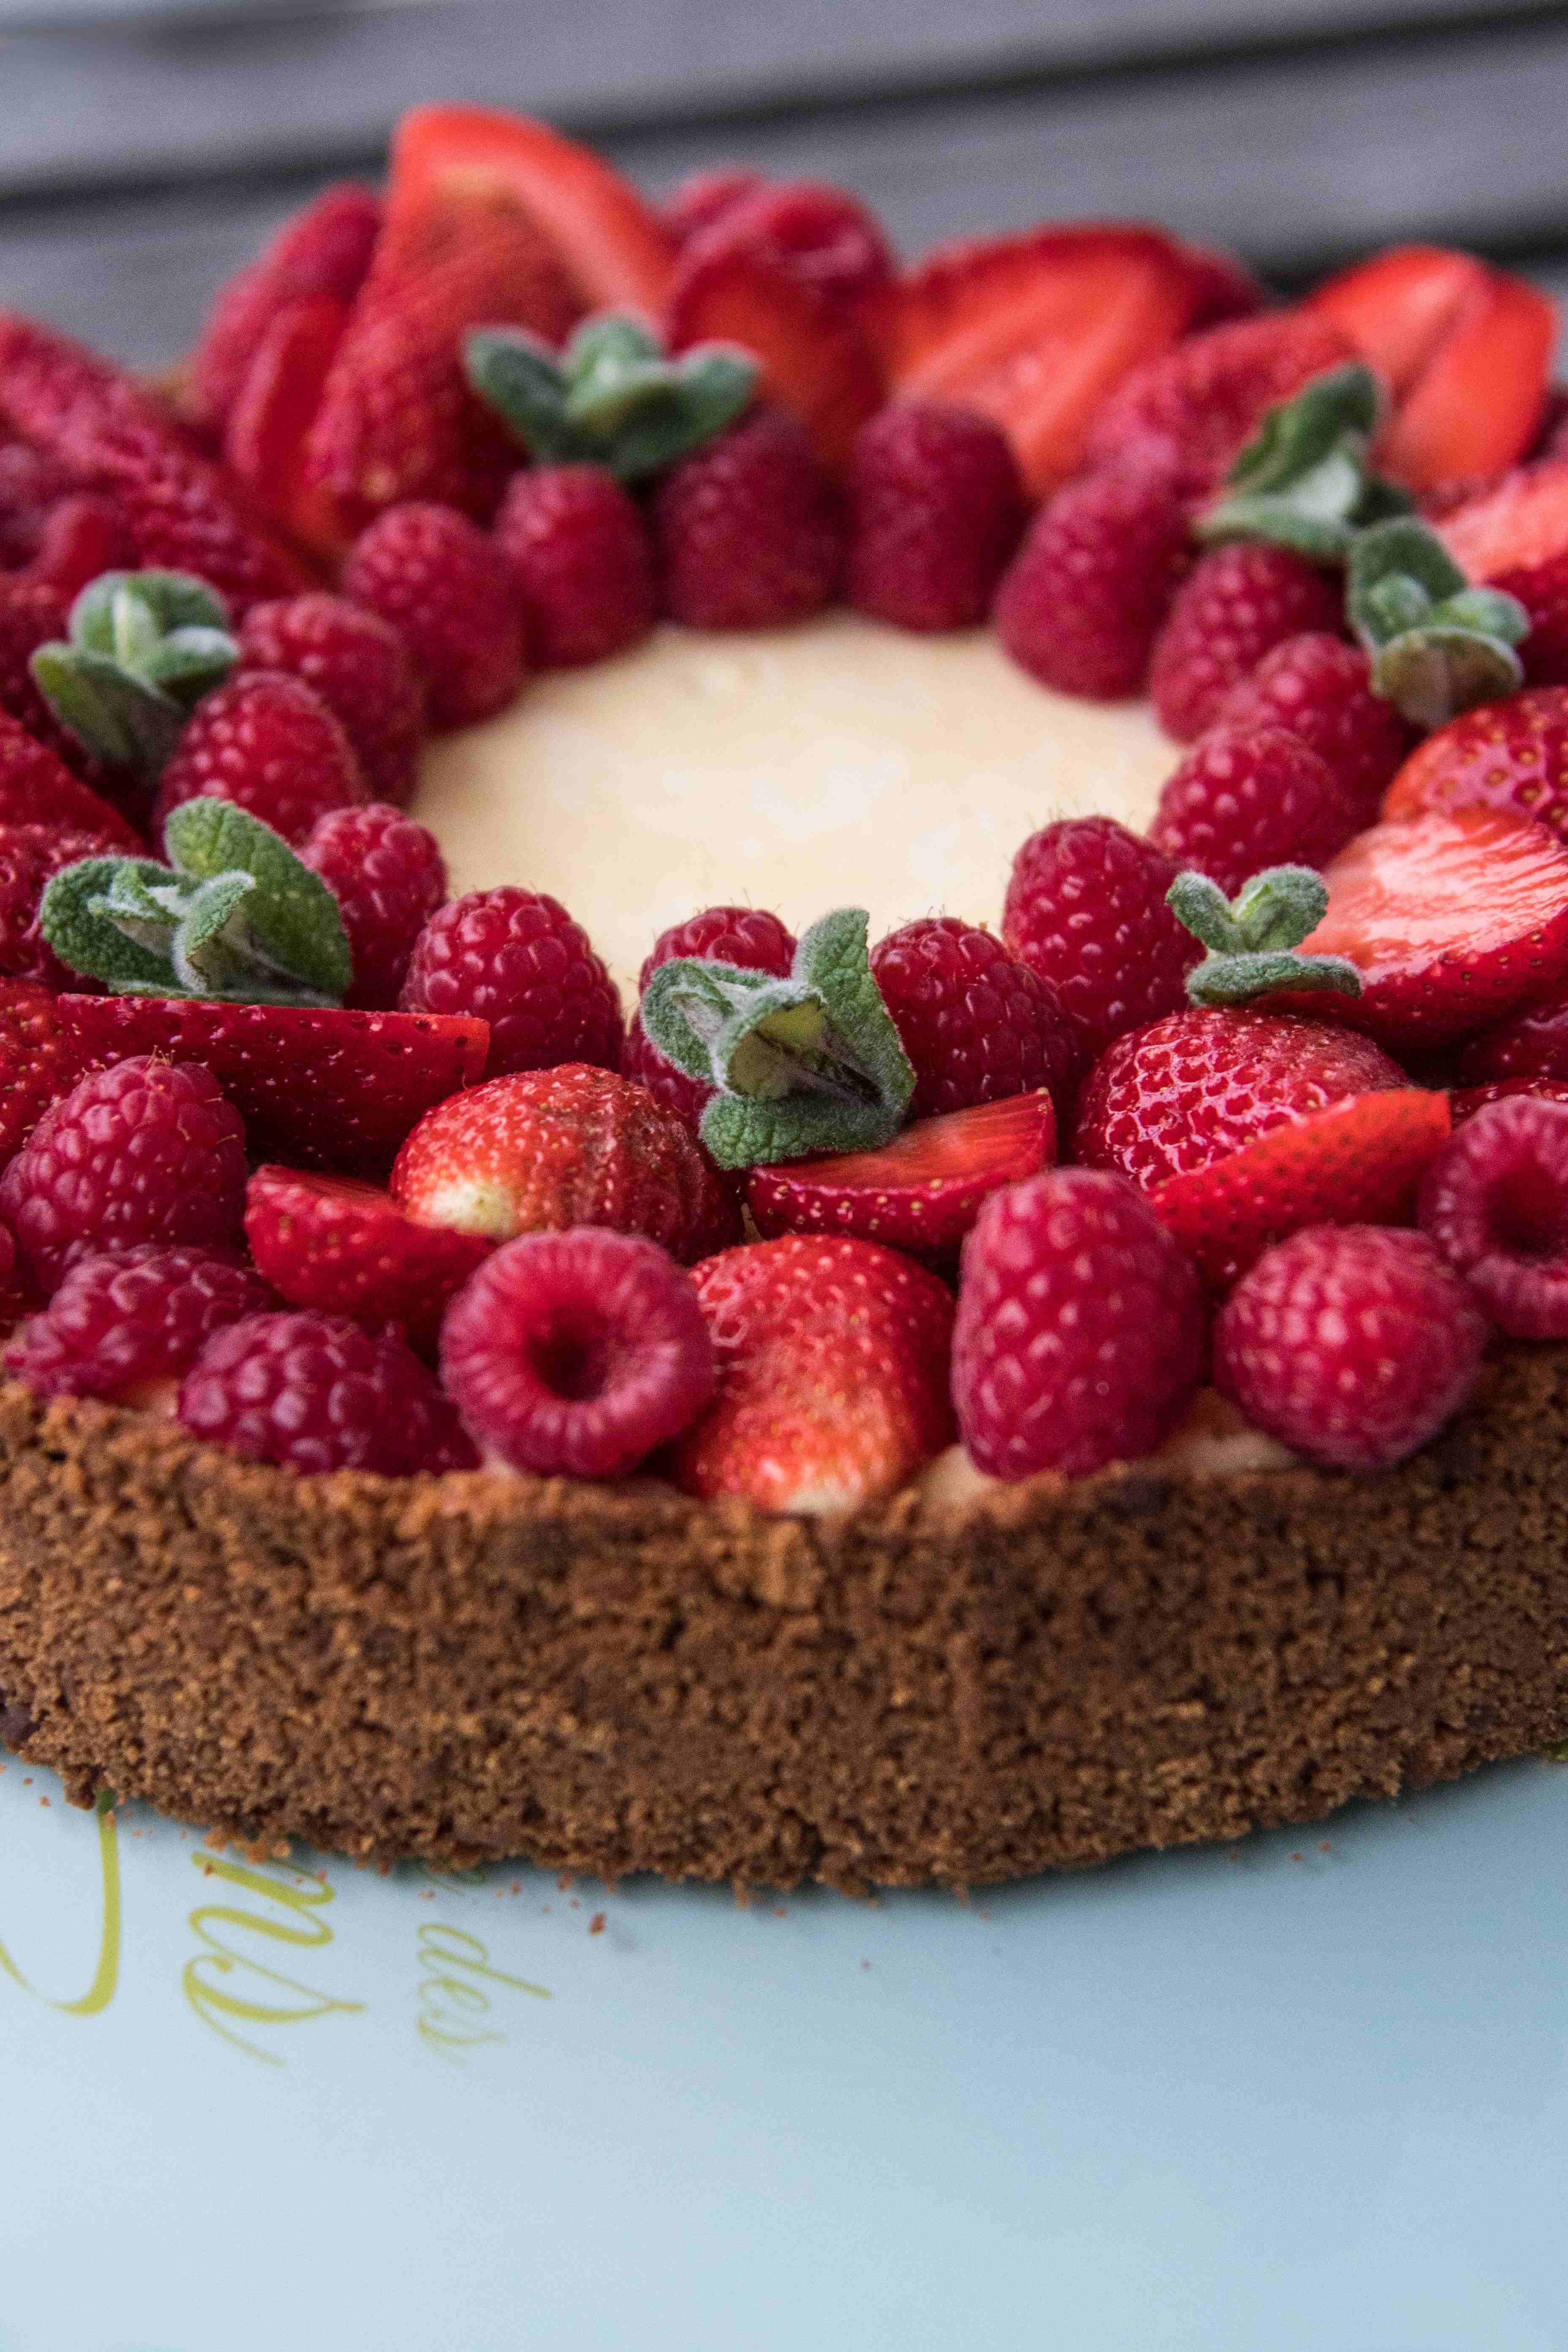 Cheesecake fruits rouges